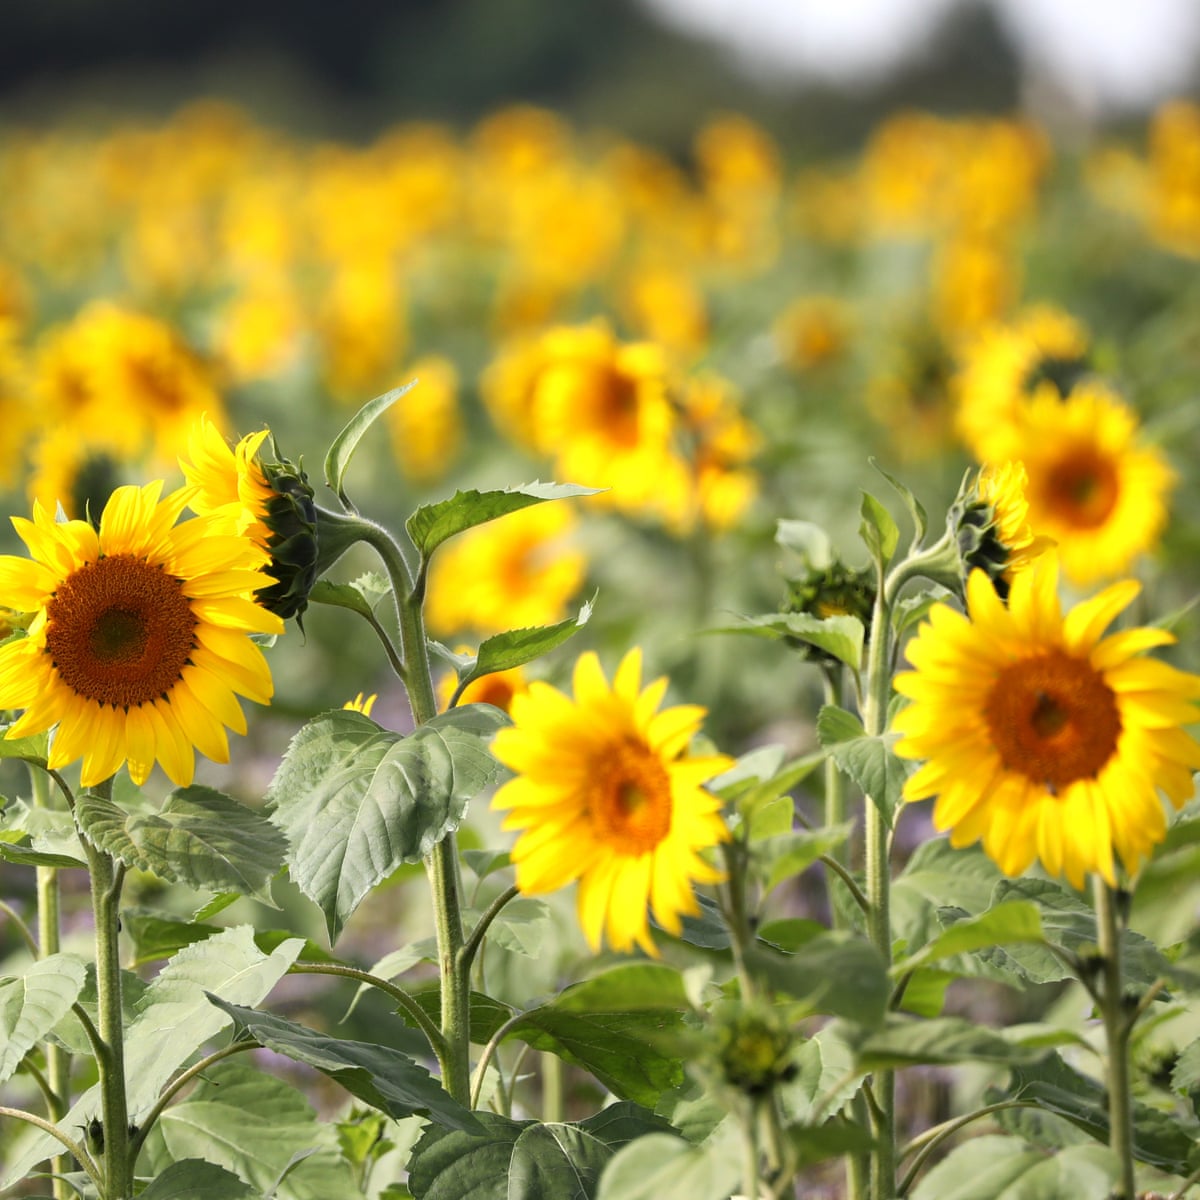 Plant sunflowers and lavender to save garden species, says RSPB ...